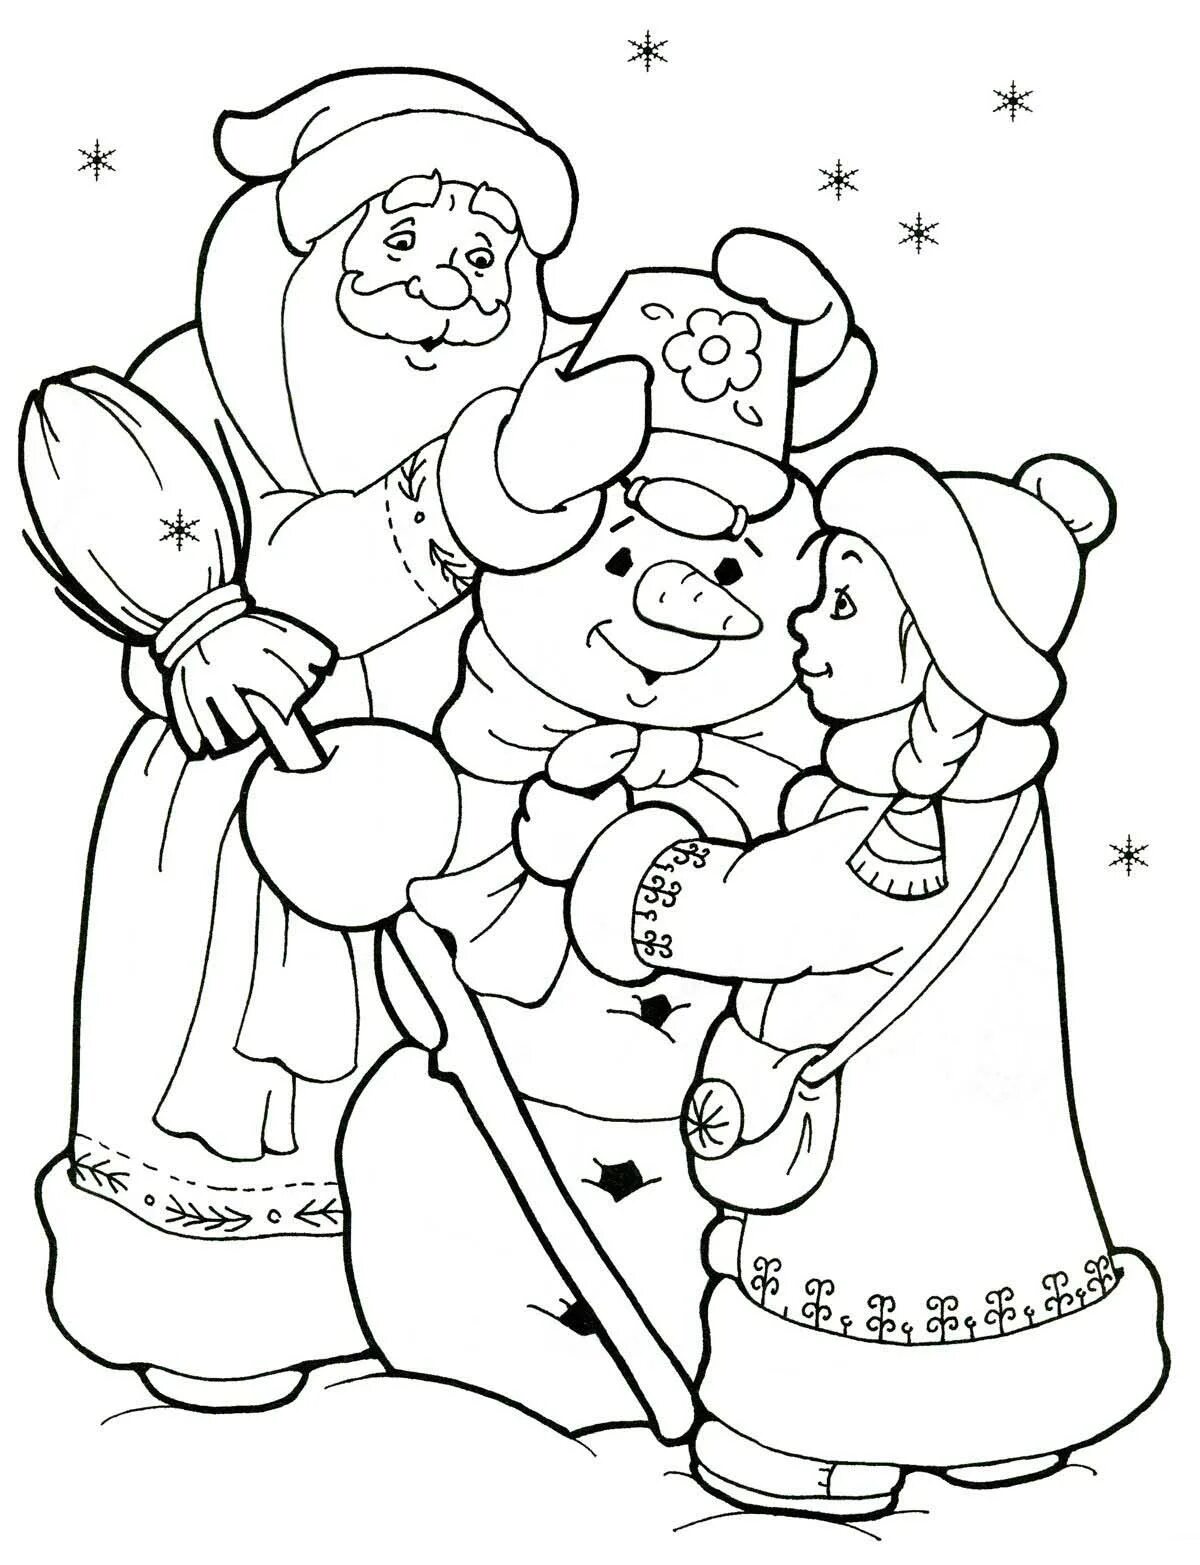 Funny santa claus and snow maiden coloring book